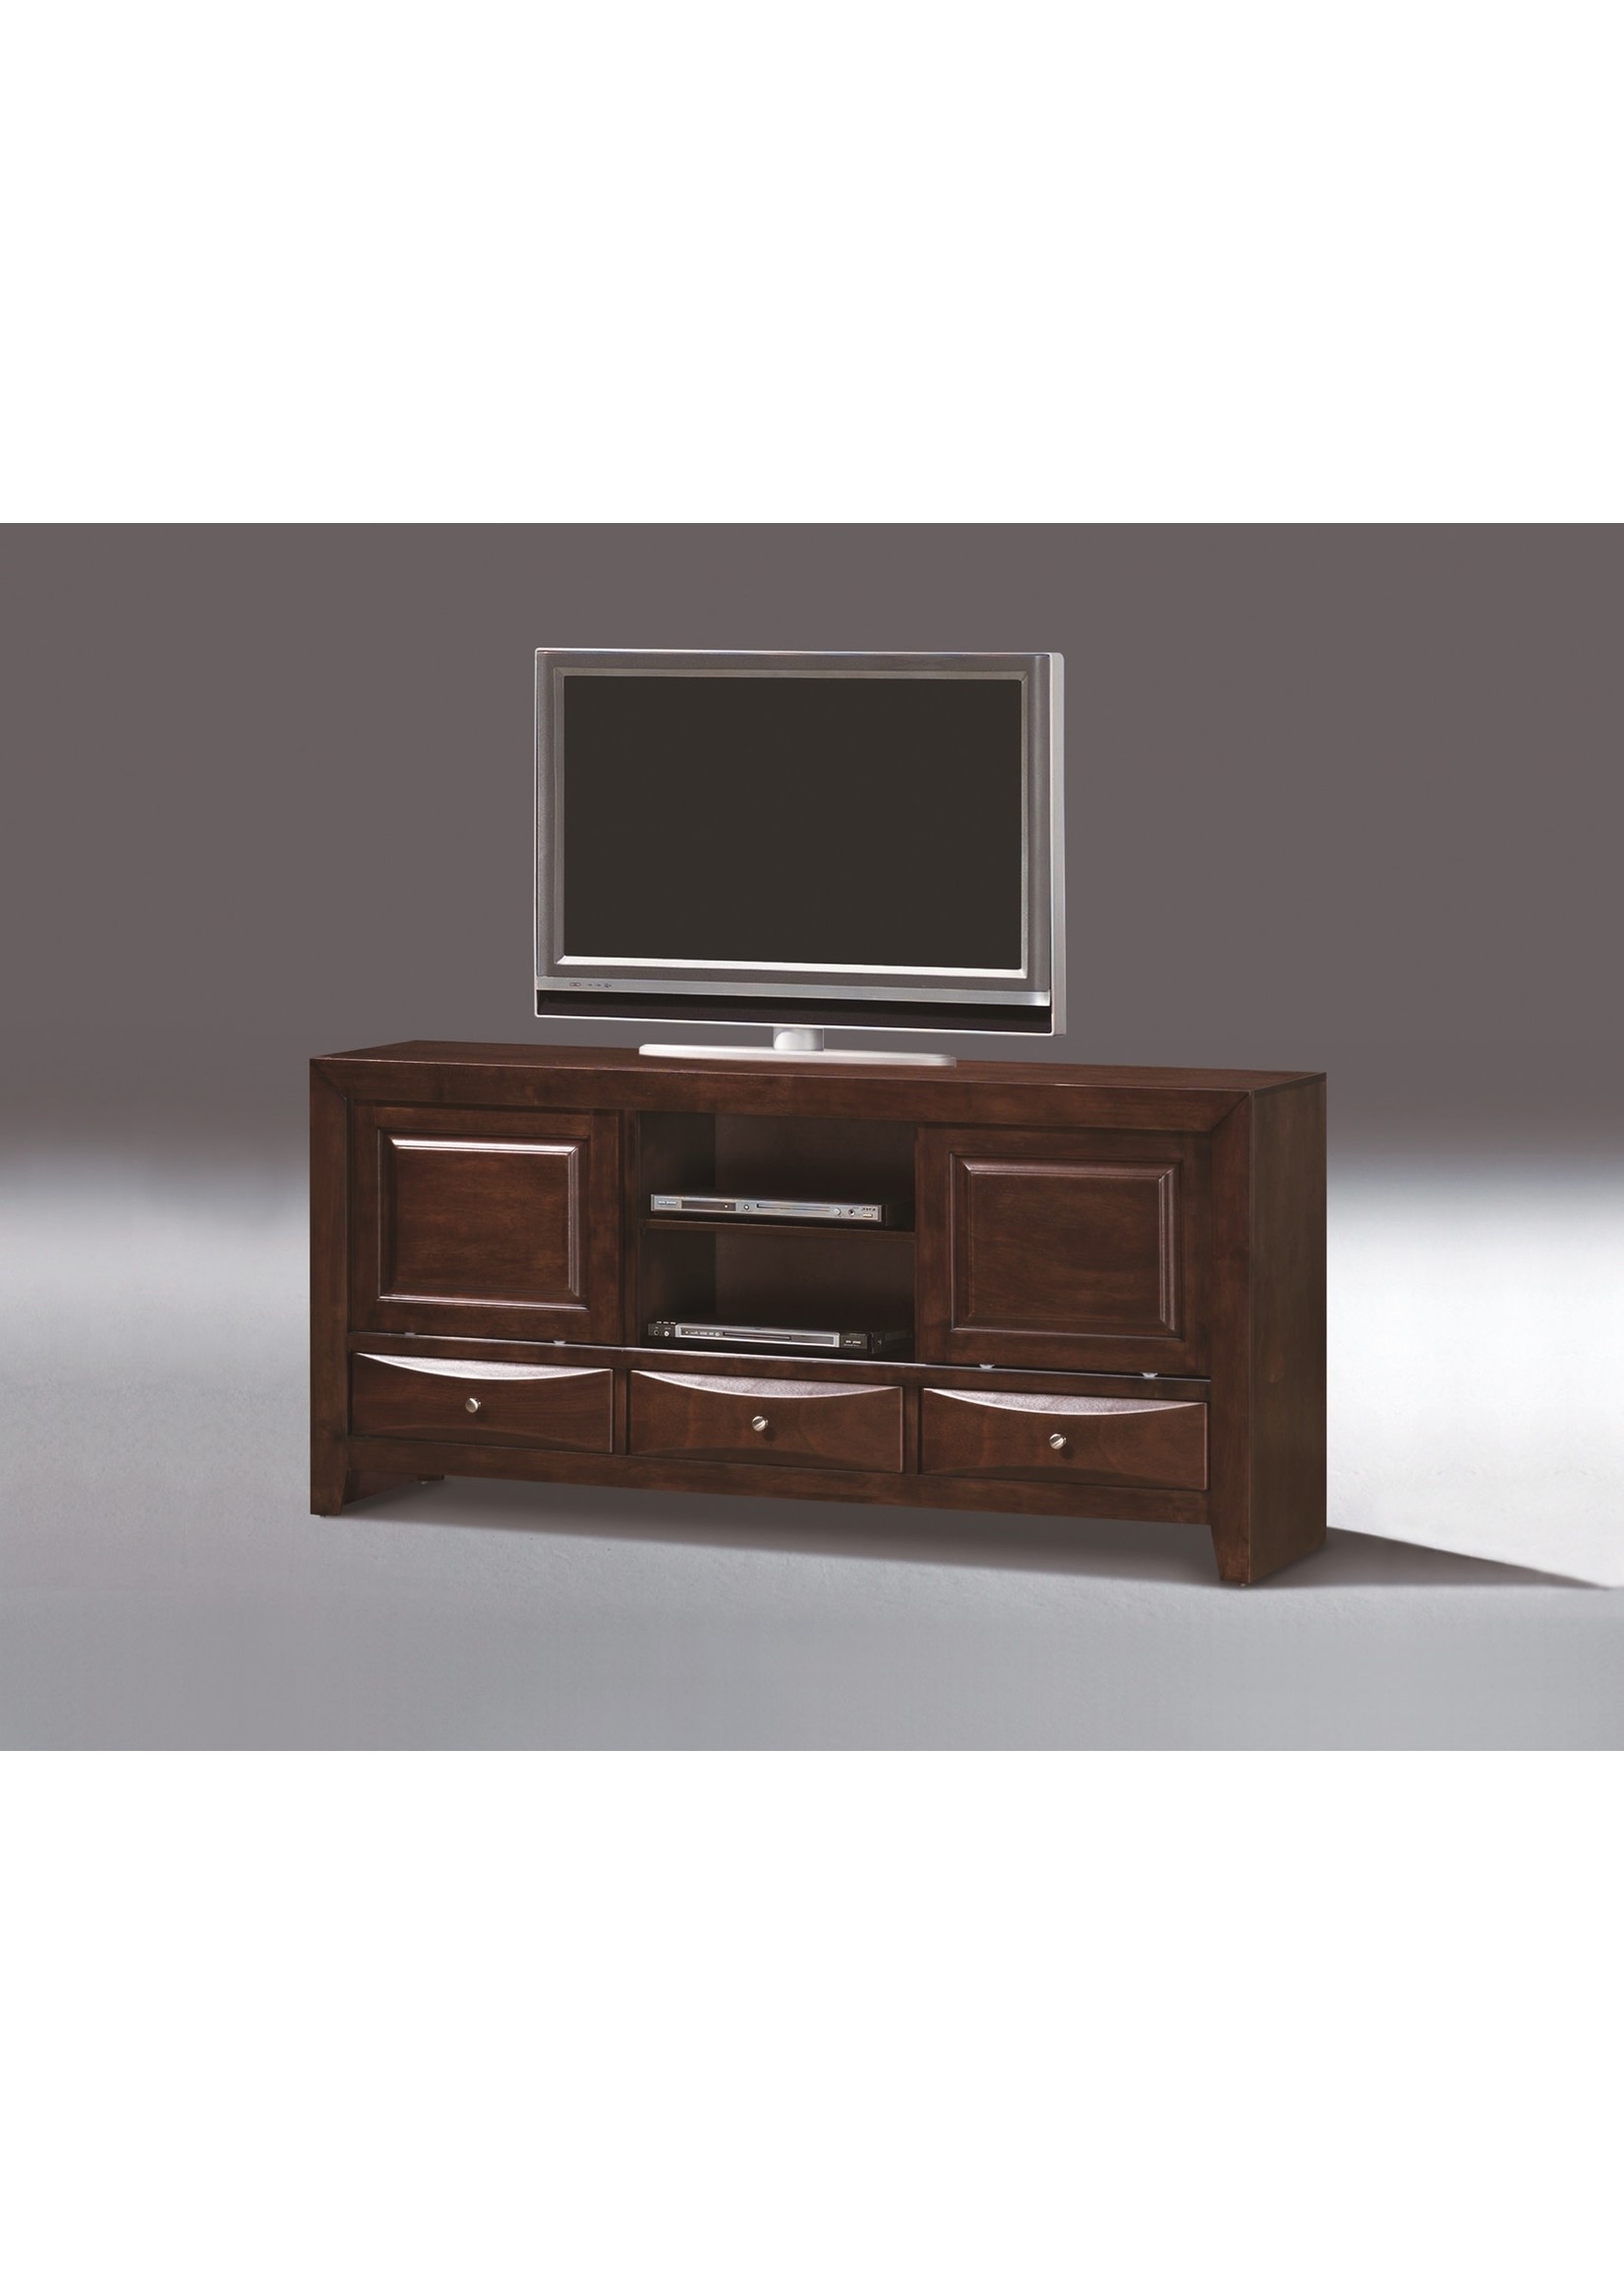 CROWNMARK 4260 EMILY TV CONSOLE 68" CHERRY